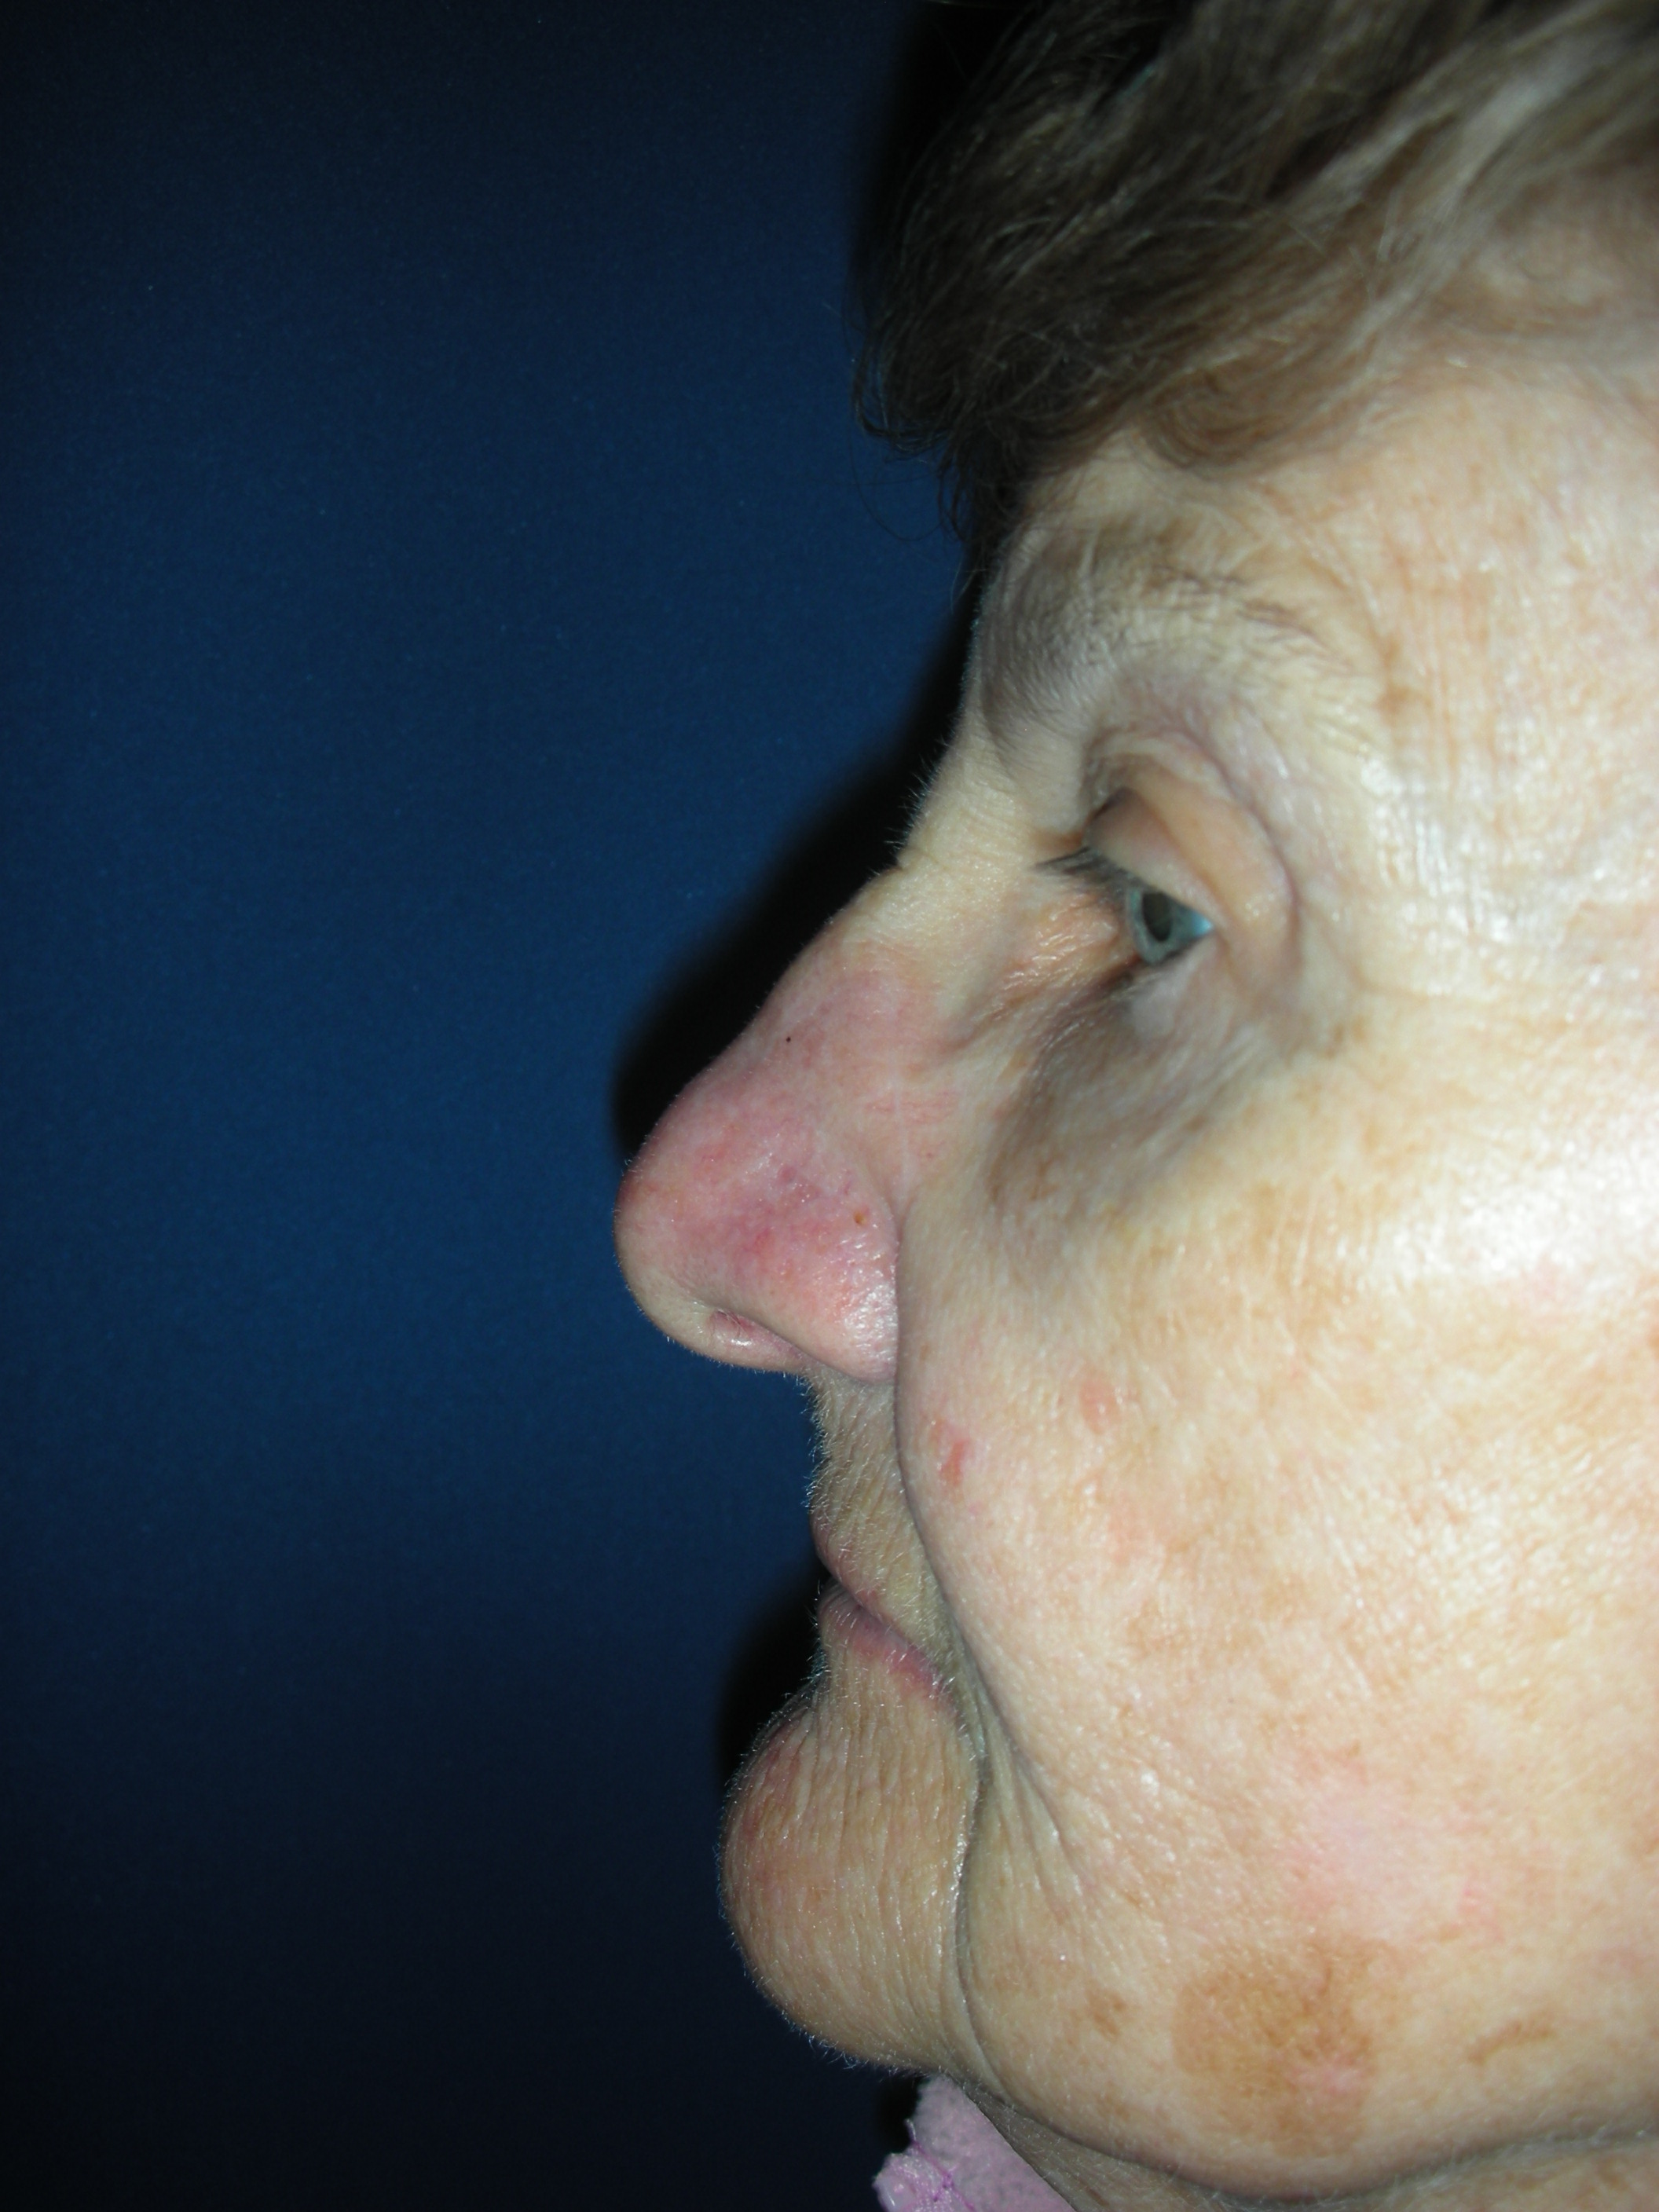 Image of flap reconstruction of nose